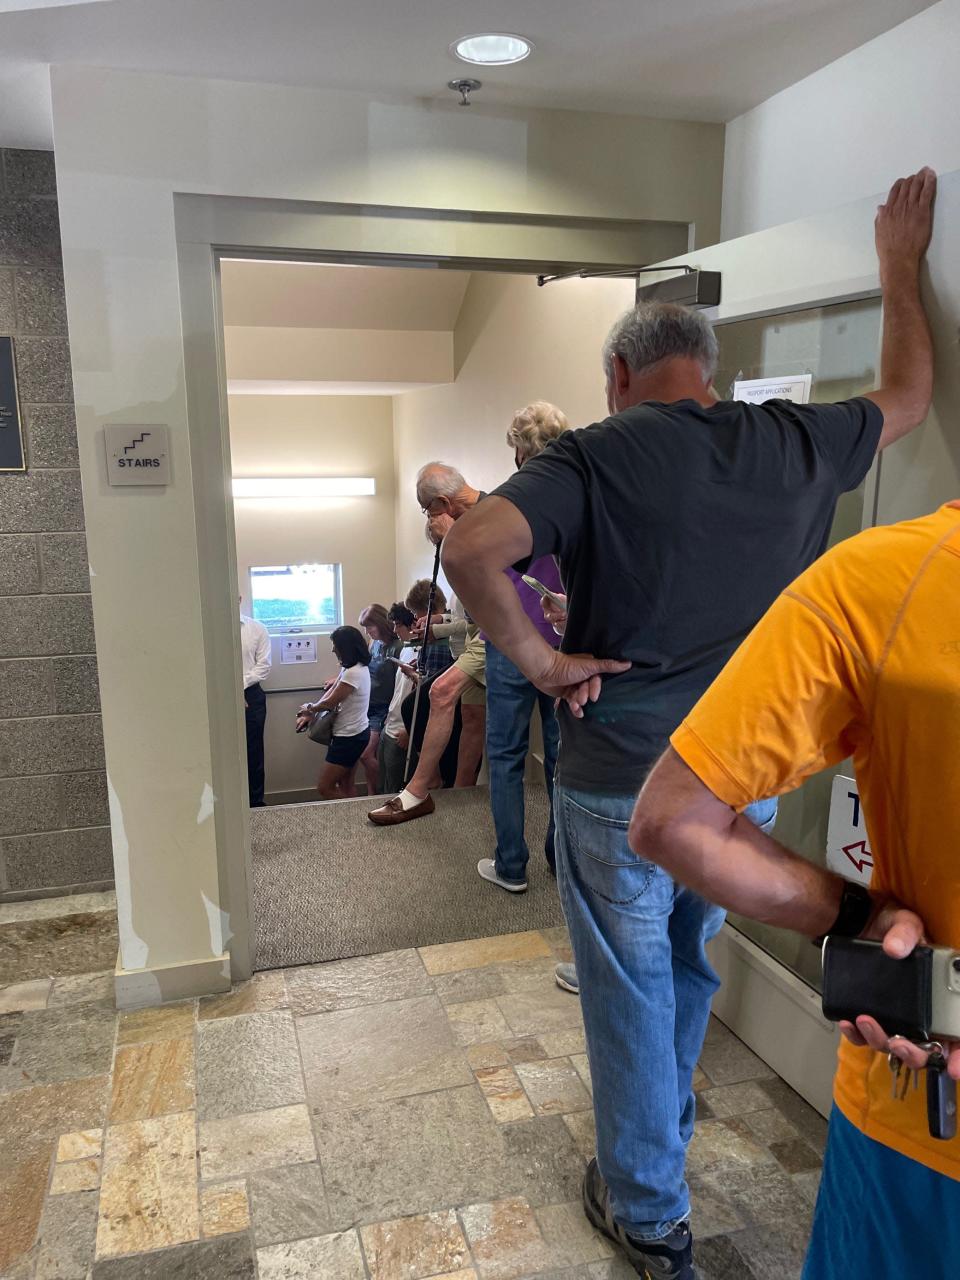 Scene in Jackson, Wyoming on August 15, 2022 as voters stand in line for early voting in the primary. There is interest in the Cheney-Hageman race - the line for early voting Monday at the Teton County building is up the stairs and nearly out the door.